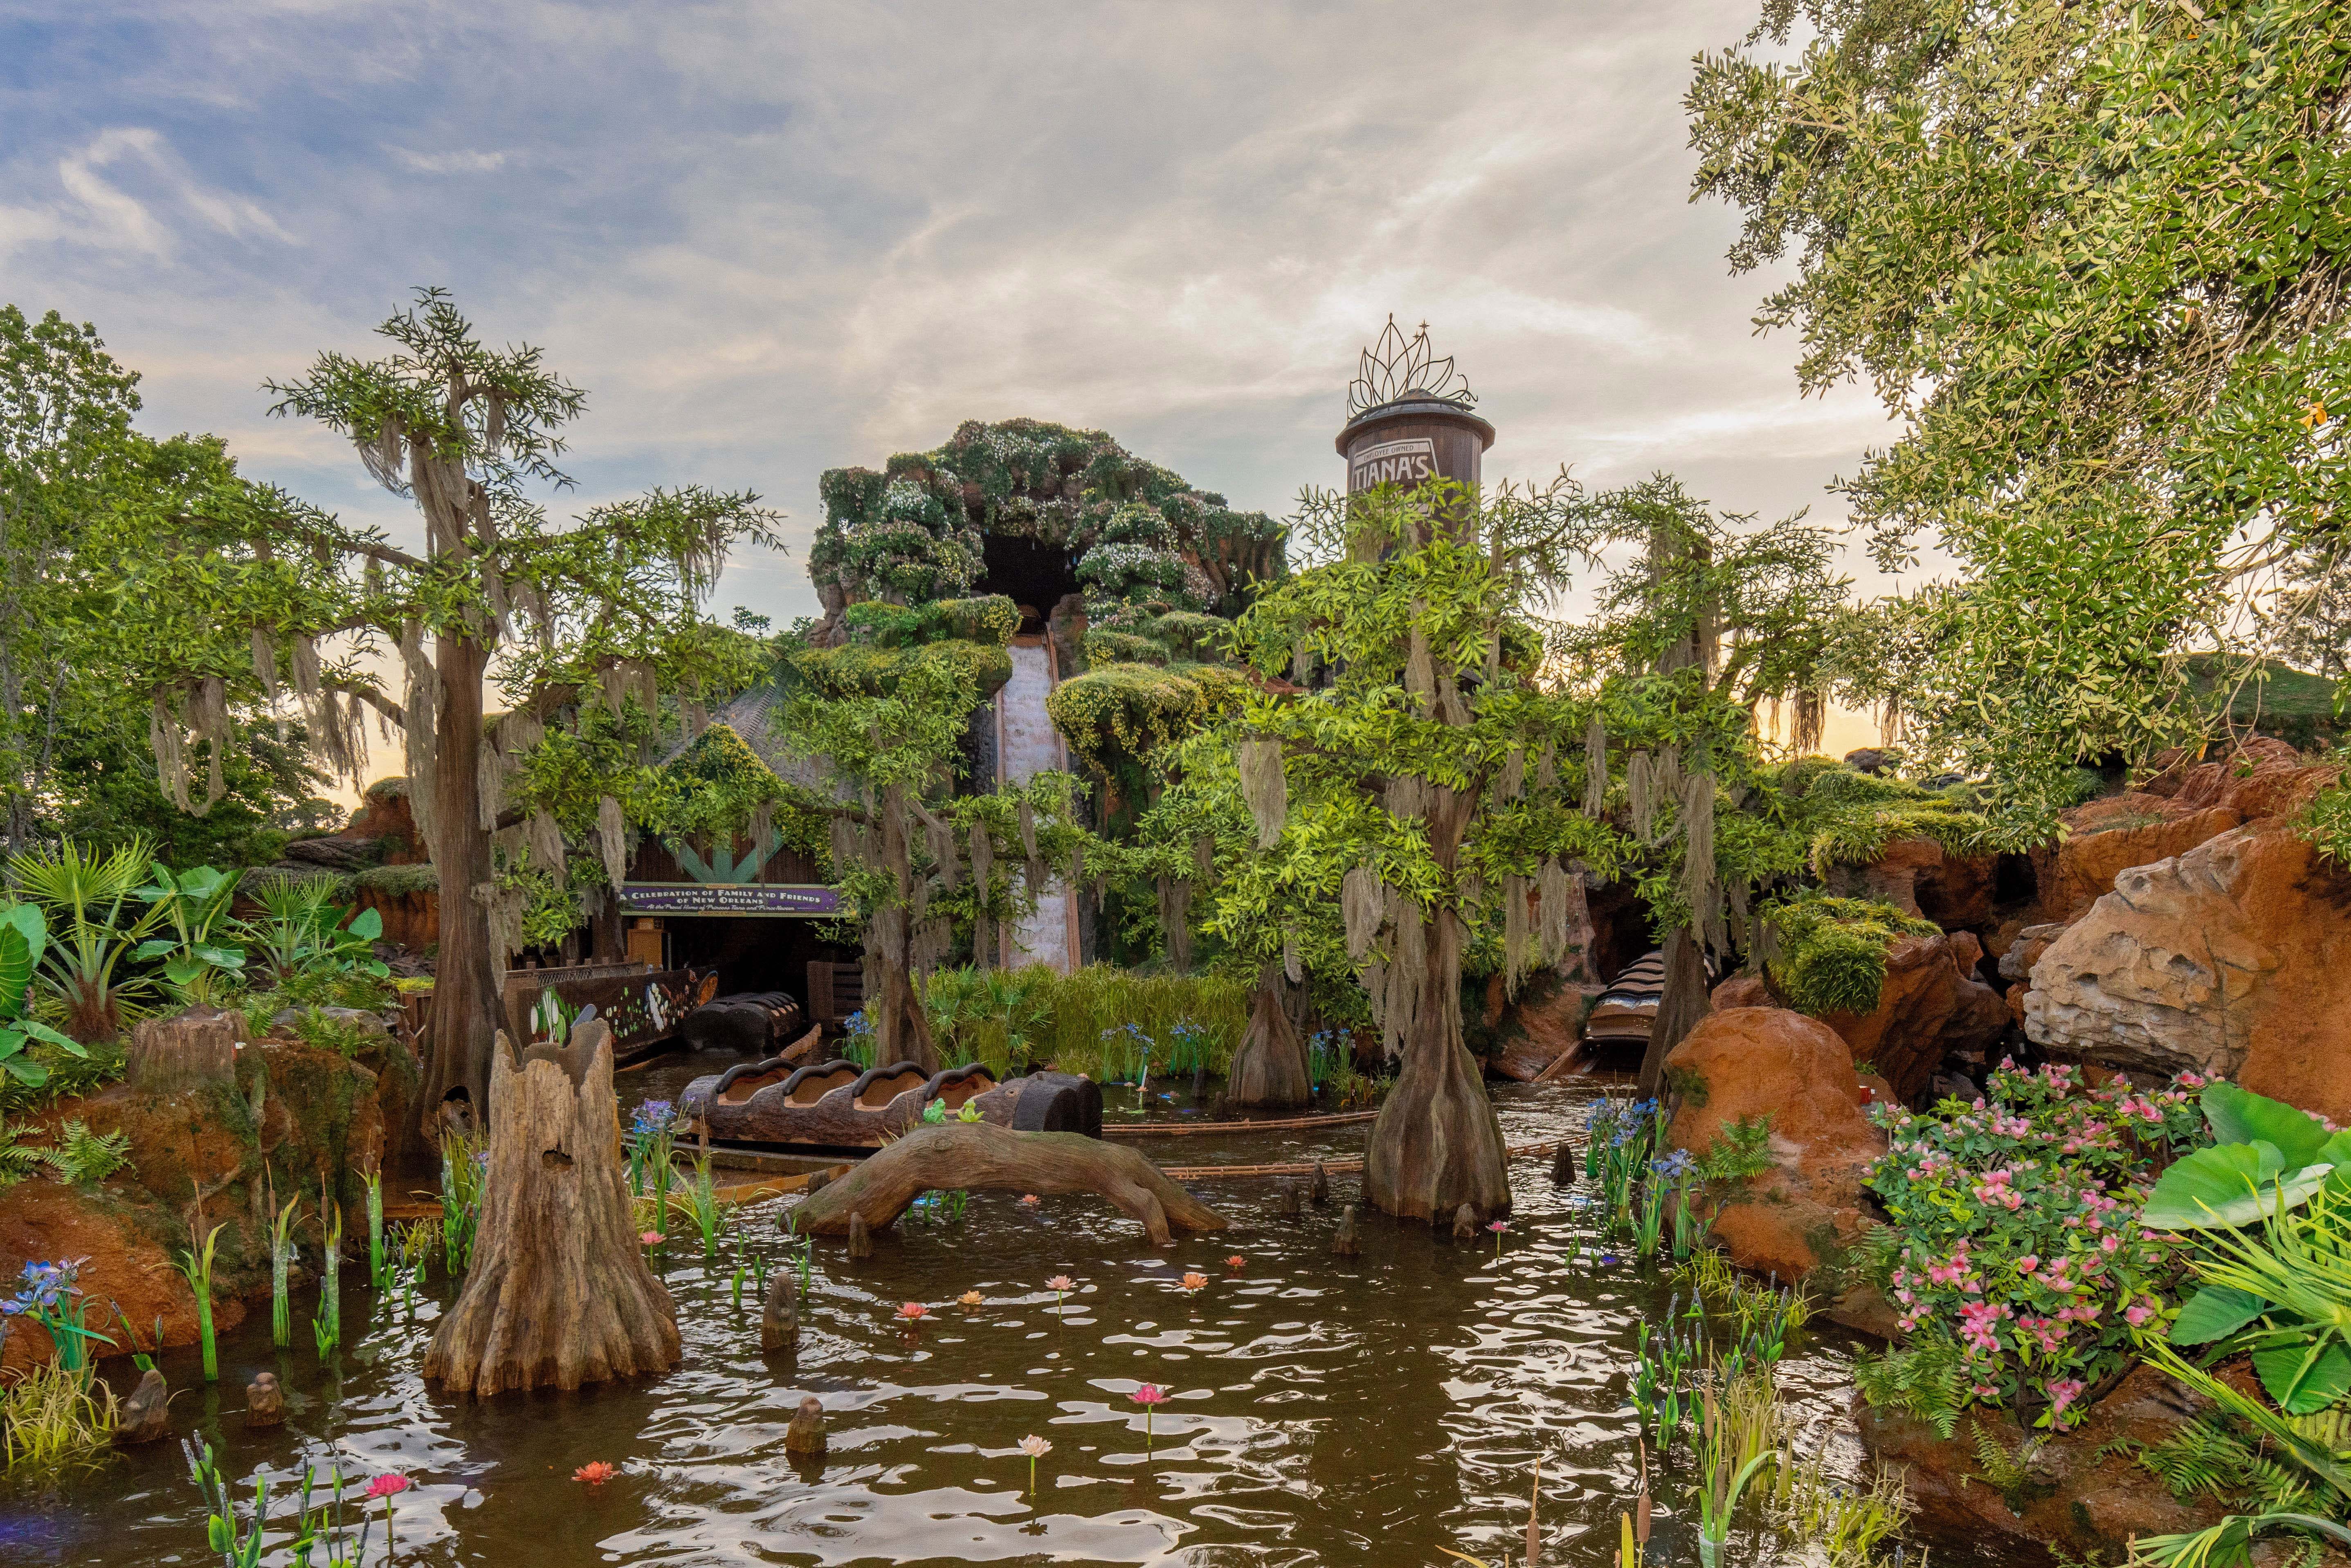 Tiana’s Bayou Adventure Invites Guests to “Dig A Little Deeper” Into Once-Problematic Disney Attraction